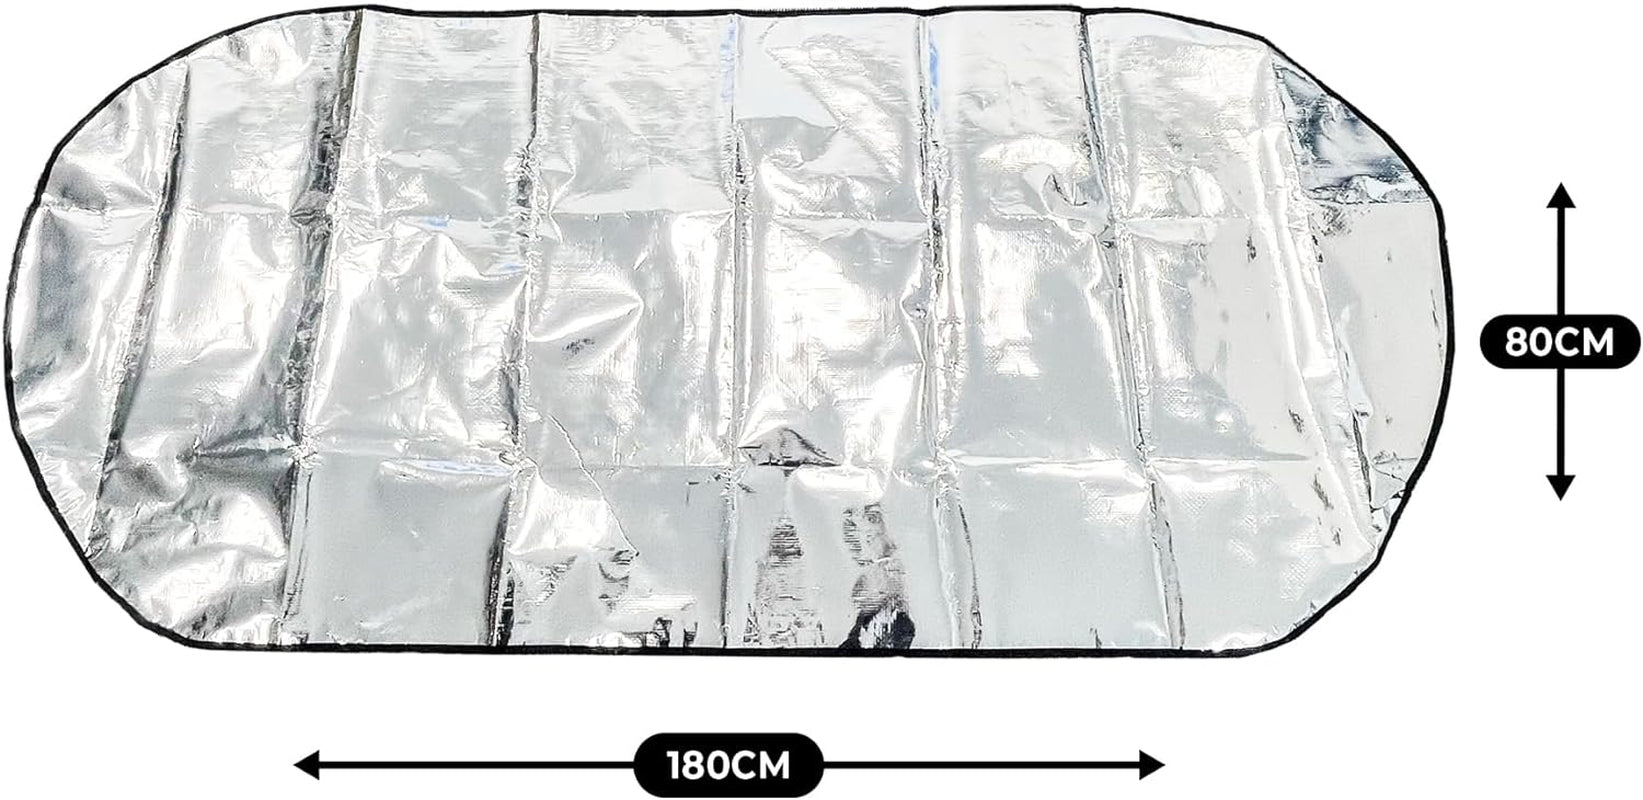 Windscreen Protection Foil Cover for Winter and Summer Protects against Snow/Sun/Frost/Ice... (Large - 180 X 80 Cm)